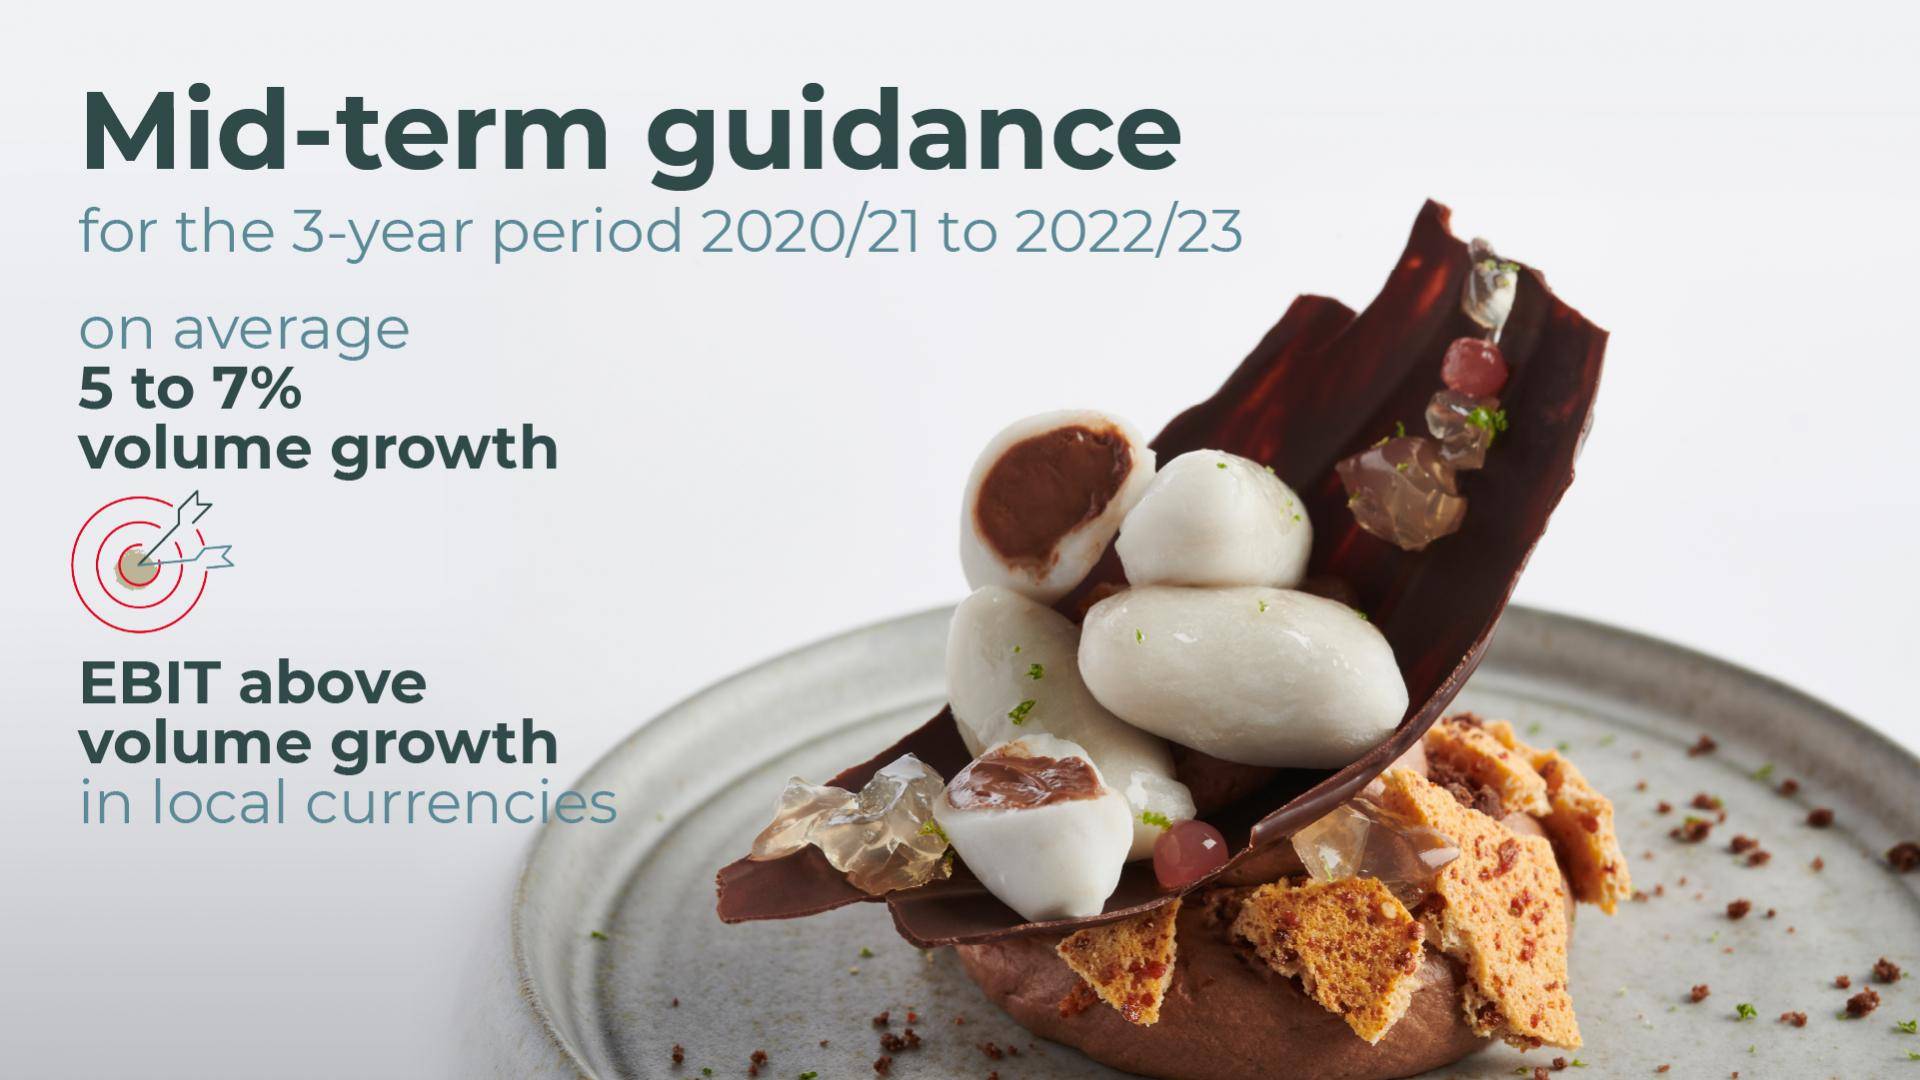 Mid-term guidance Fiscal Year 2020-21 Barry Callebaut